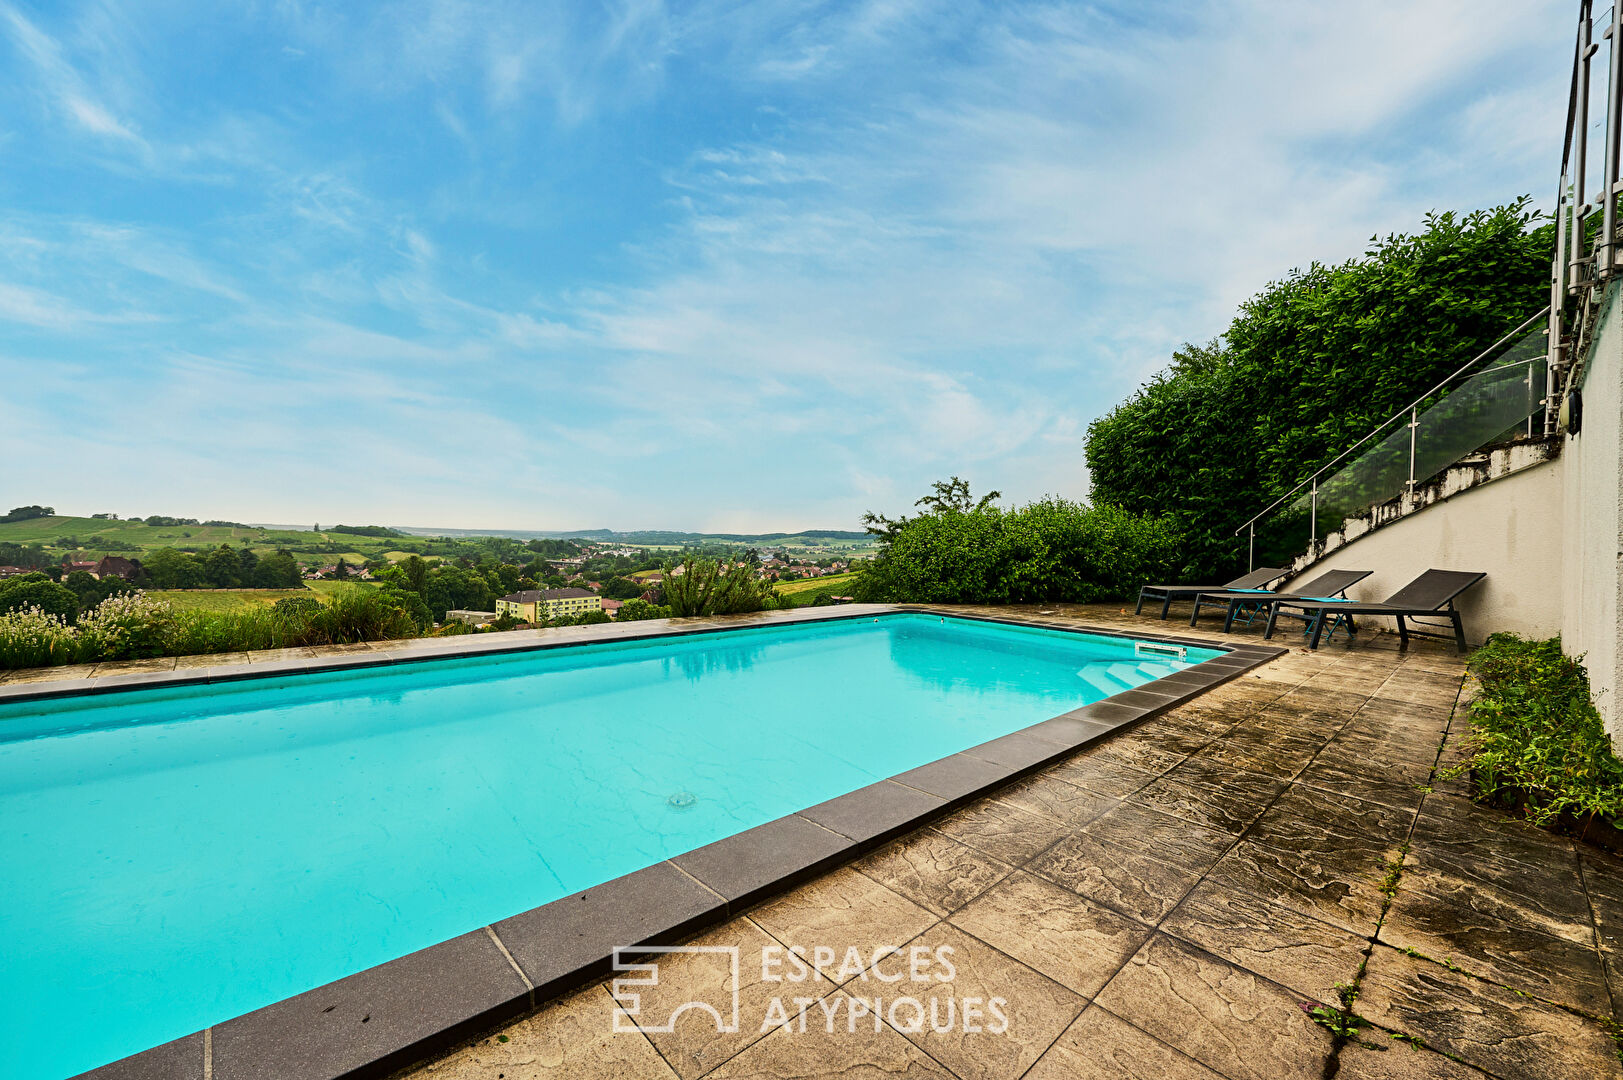 House with swimming pool and exceptional view in the heart of the Jura vineyards